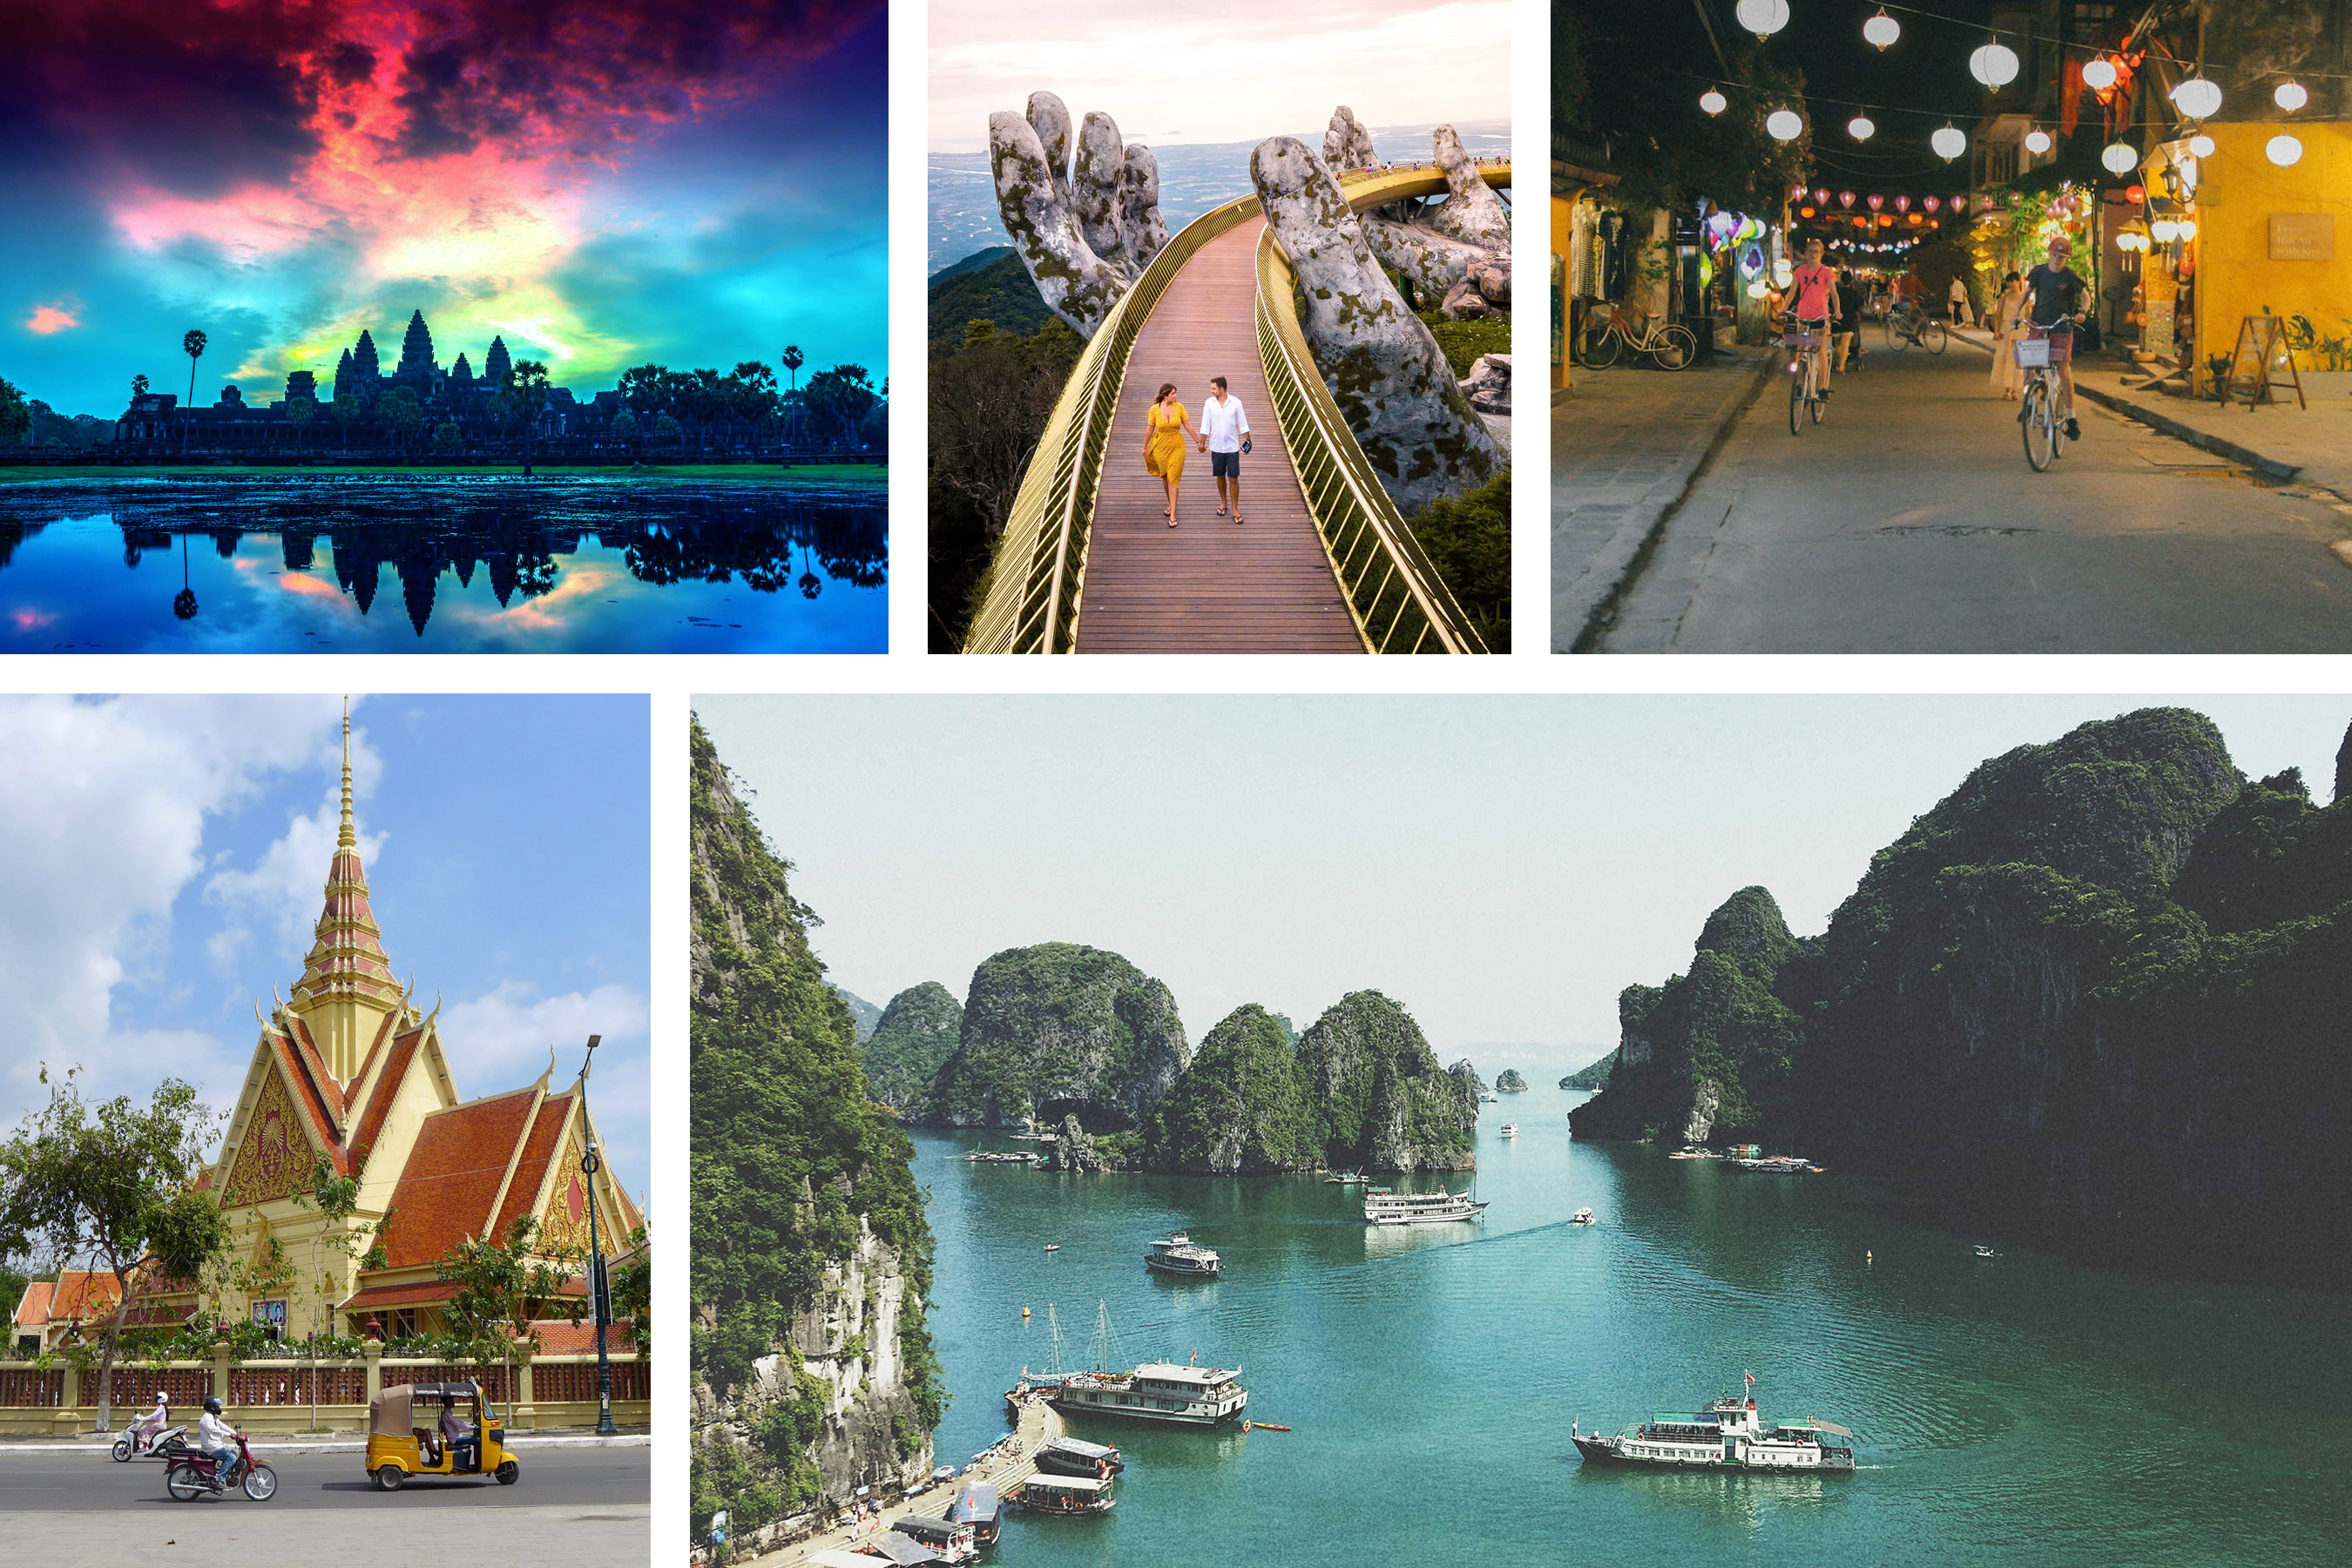 Vietnam and Cambodia are two neighboring countries in Southeast Asia that offer stunning natural and cultural attractions. From the ancient temples of Angkor Wat to the scenic Ha Long Bay, from the vibrant capital of Phnom Penh to the charming town of Hoi An, there is something for everyone to enjoy. The best time to visit these destinations is from November to April, when the weather is dry and pleasant.